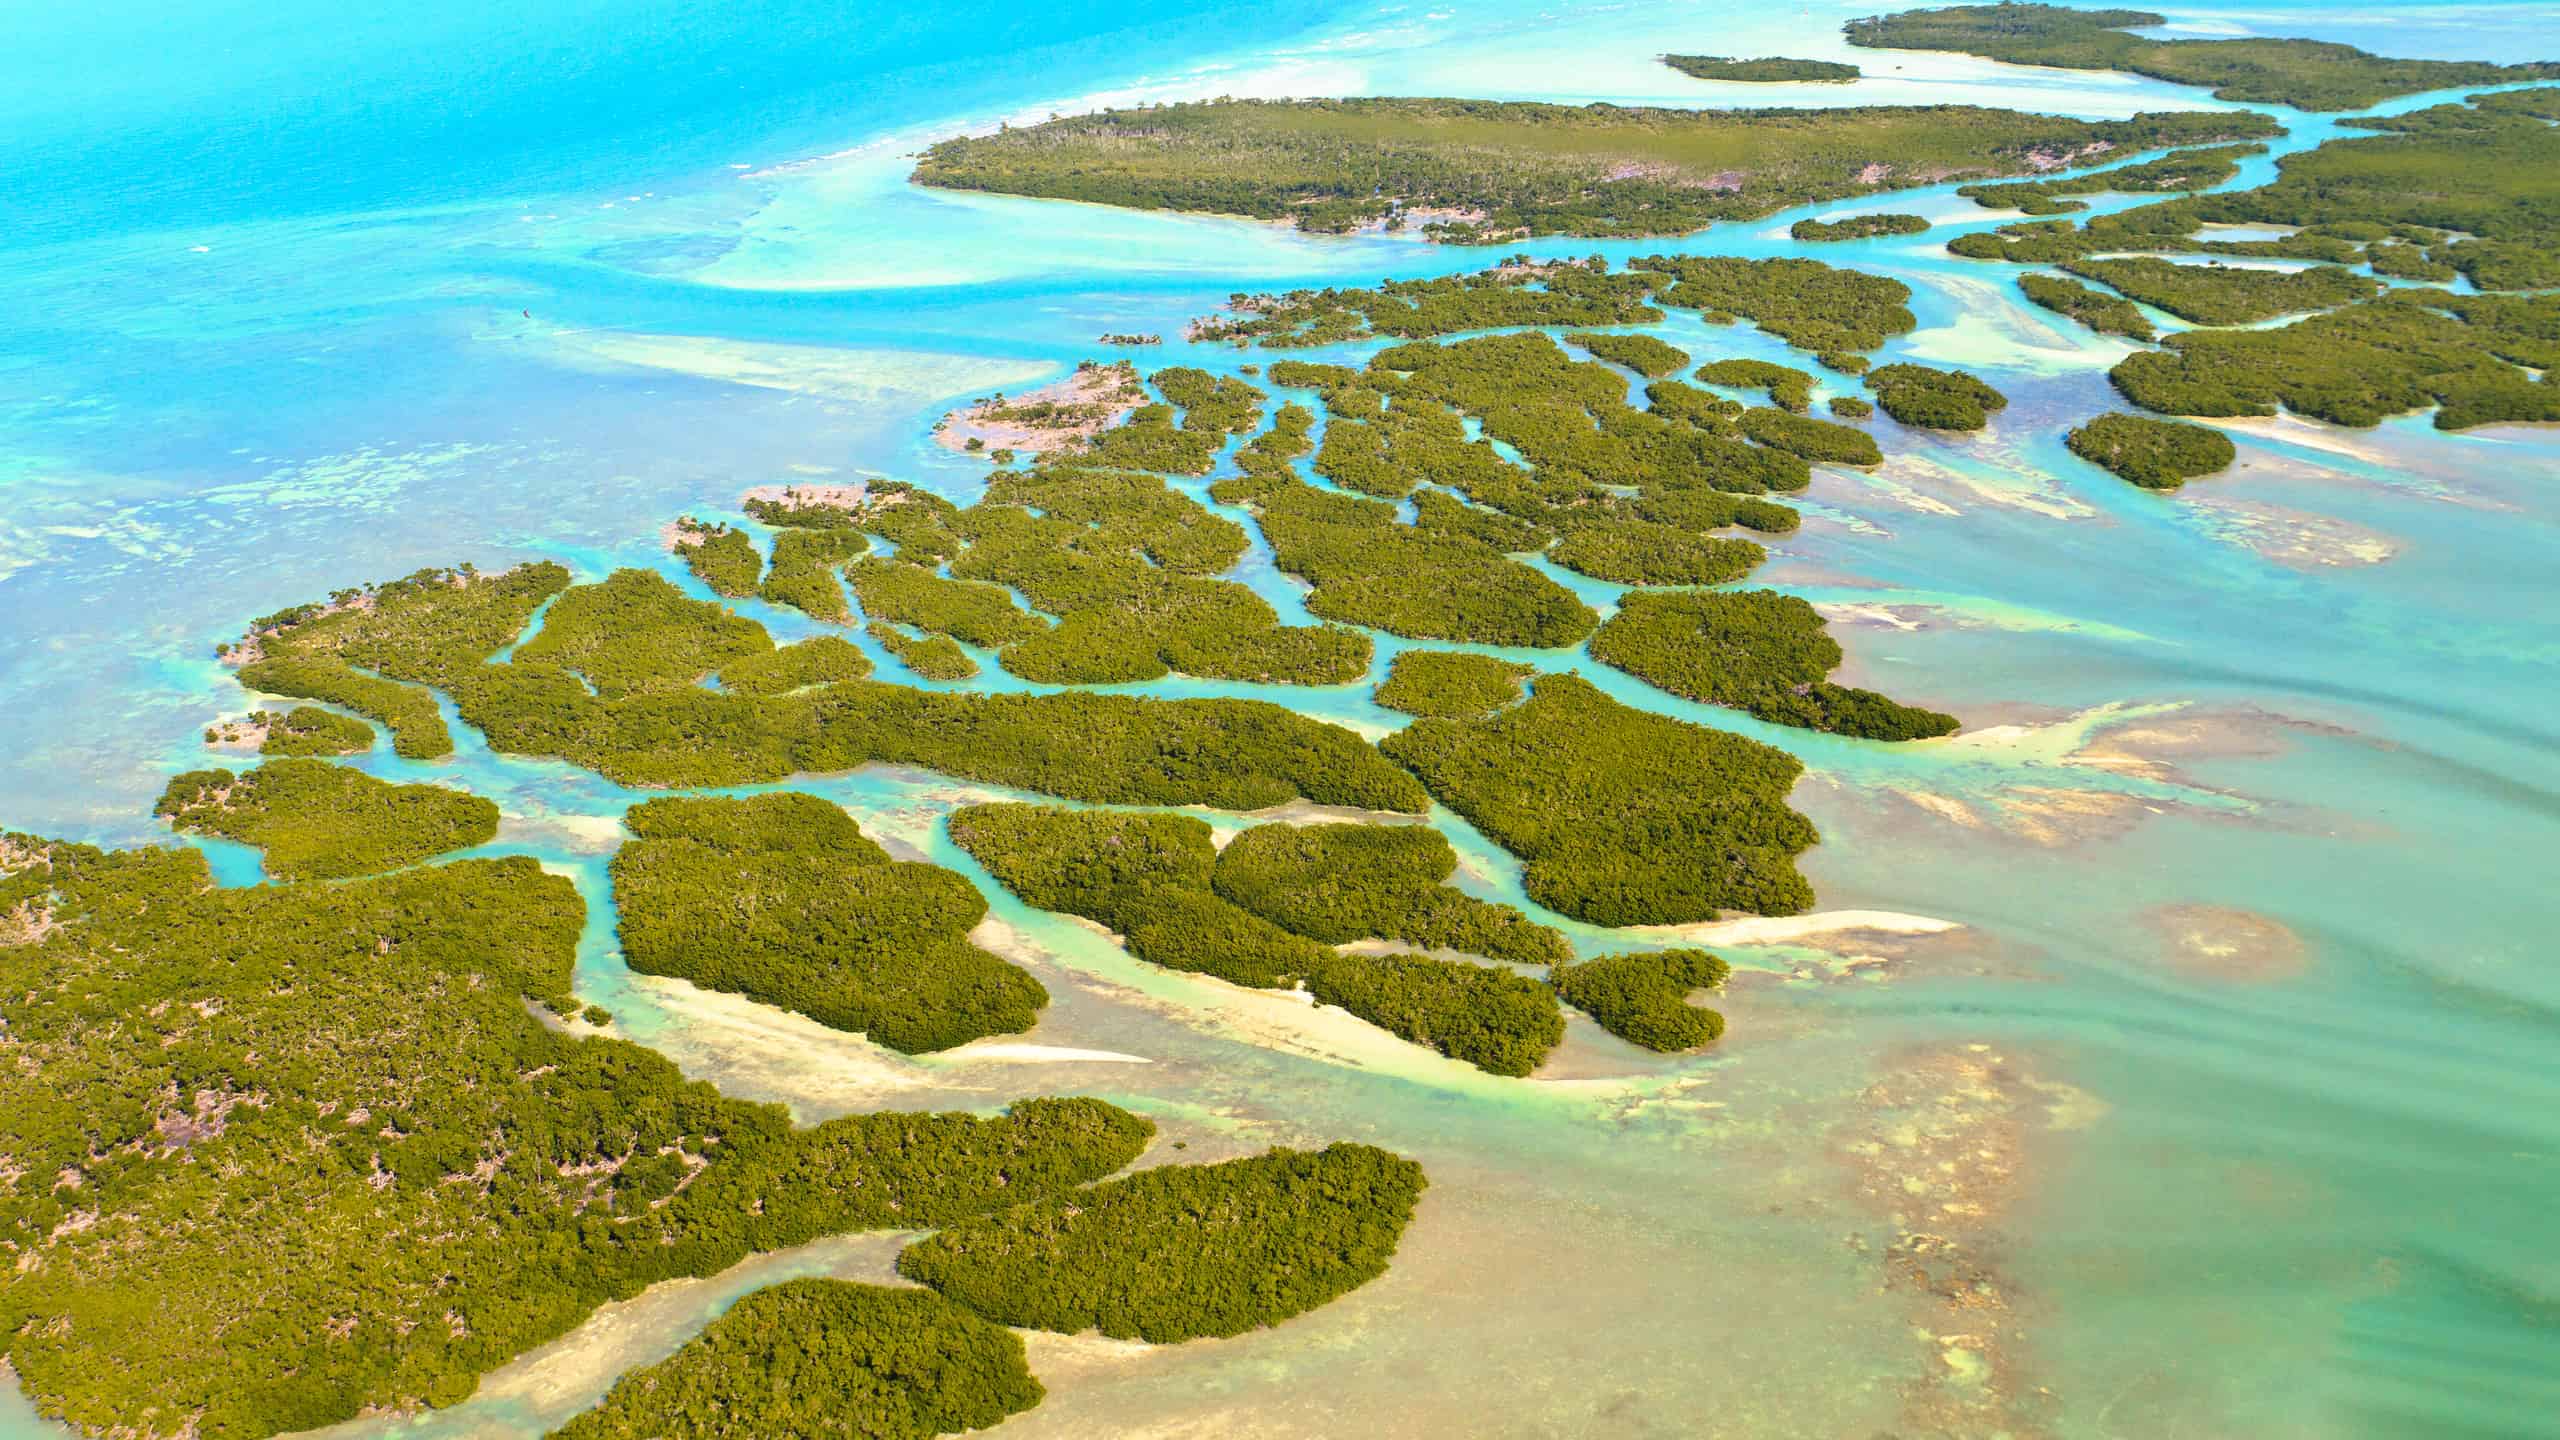 The Florida Keys are low-lying islands found in shallow waters